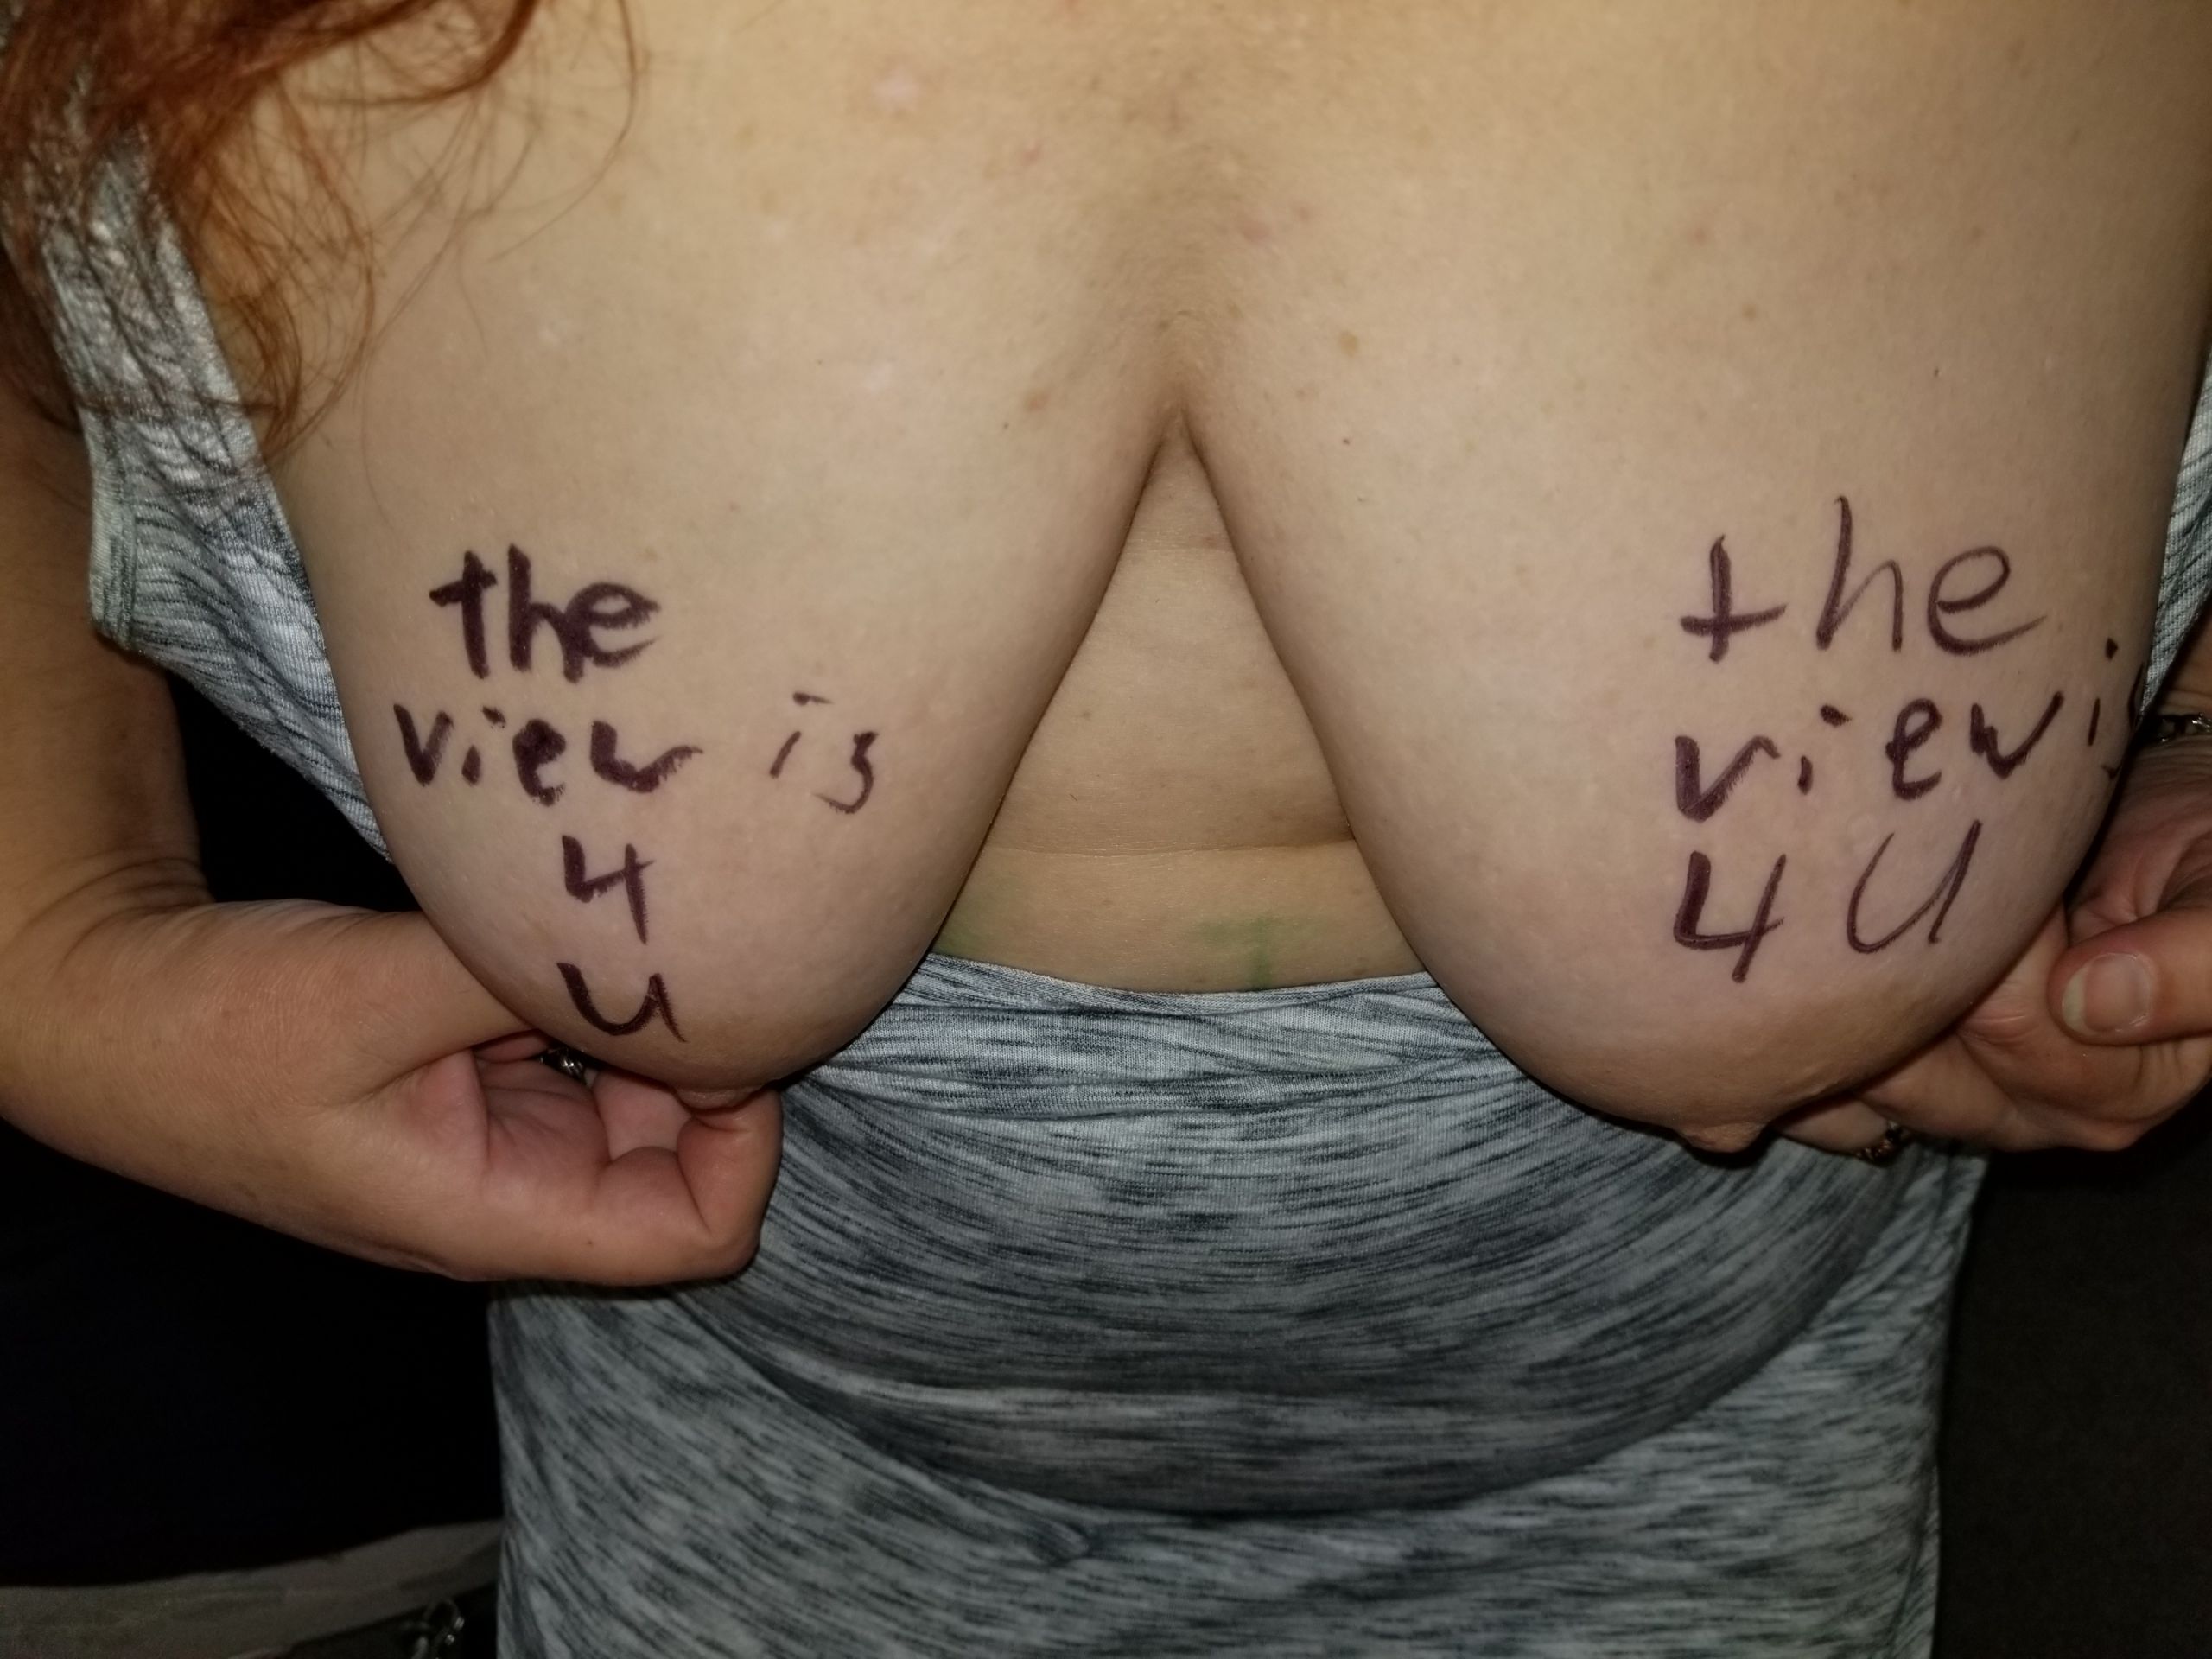 Laurie Shows her TITS